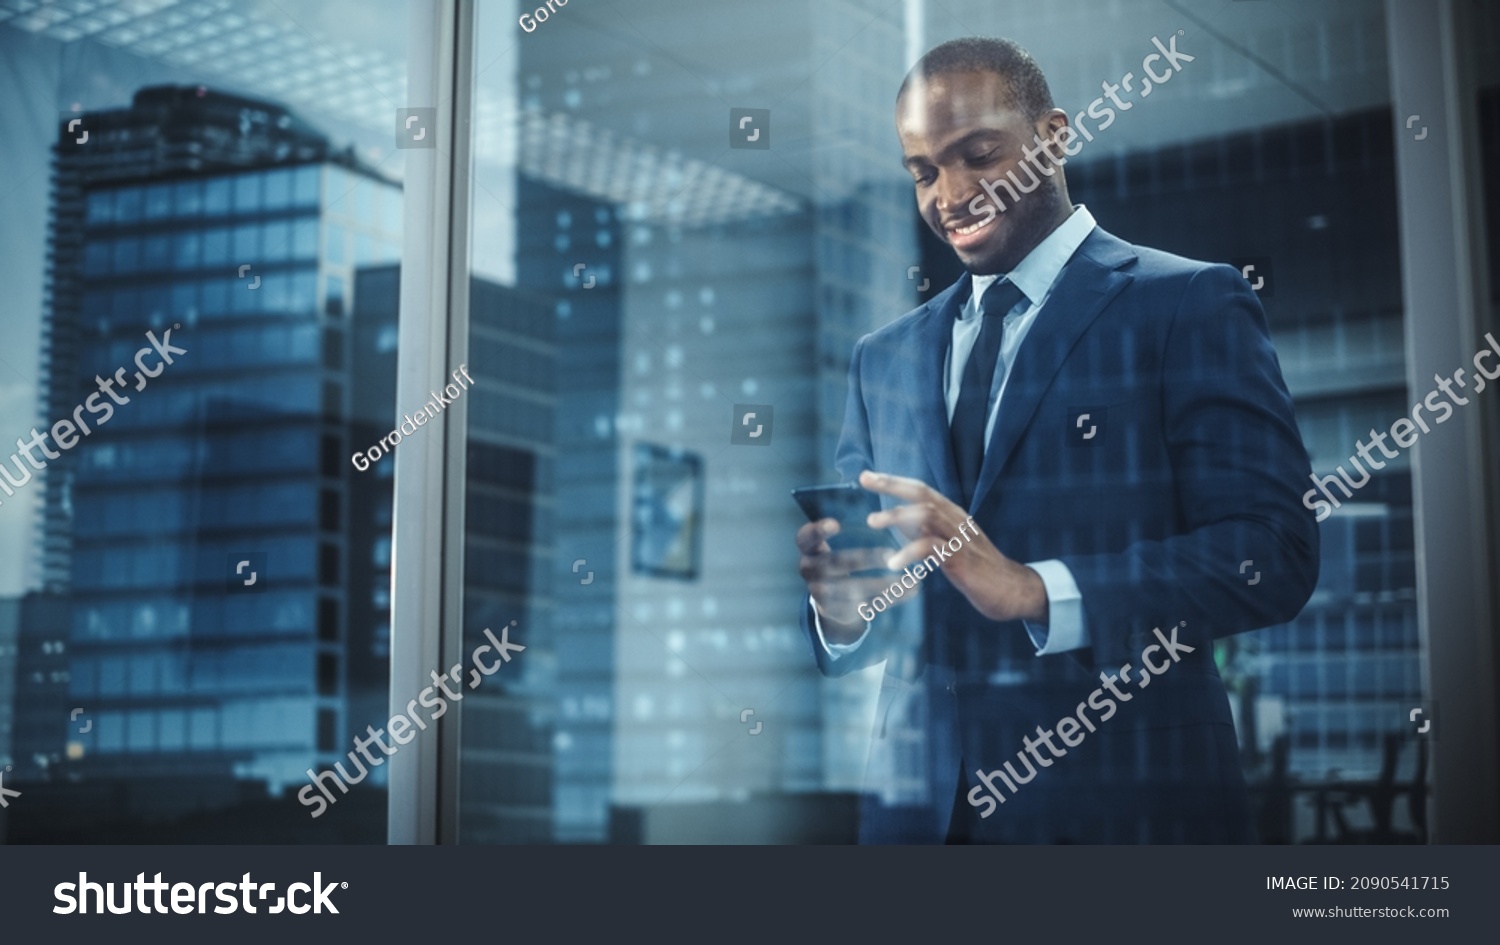 Portrait of Successful Black Businessman Wearing Suit Standing, Using Smartphone Looking out of the Window. Successful African CEO Planning e-Commerce Investment Strategy. From Outside Shot #2090541715